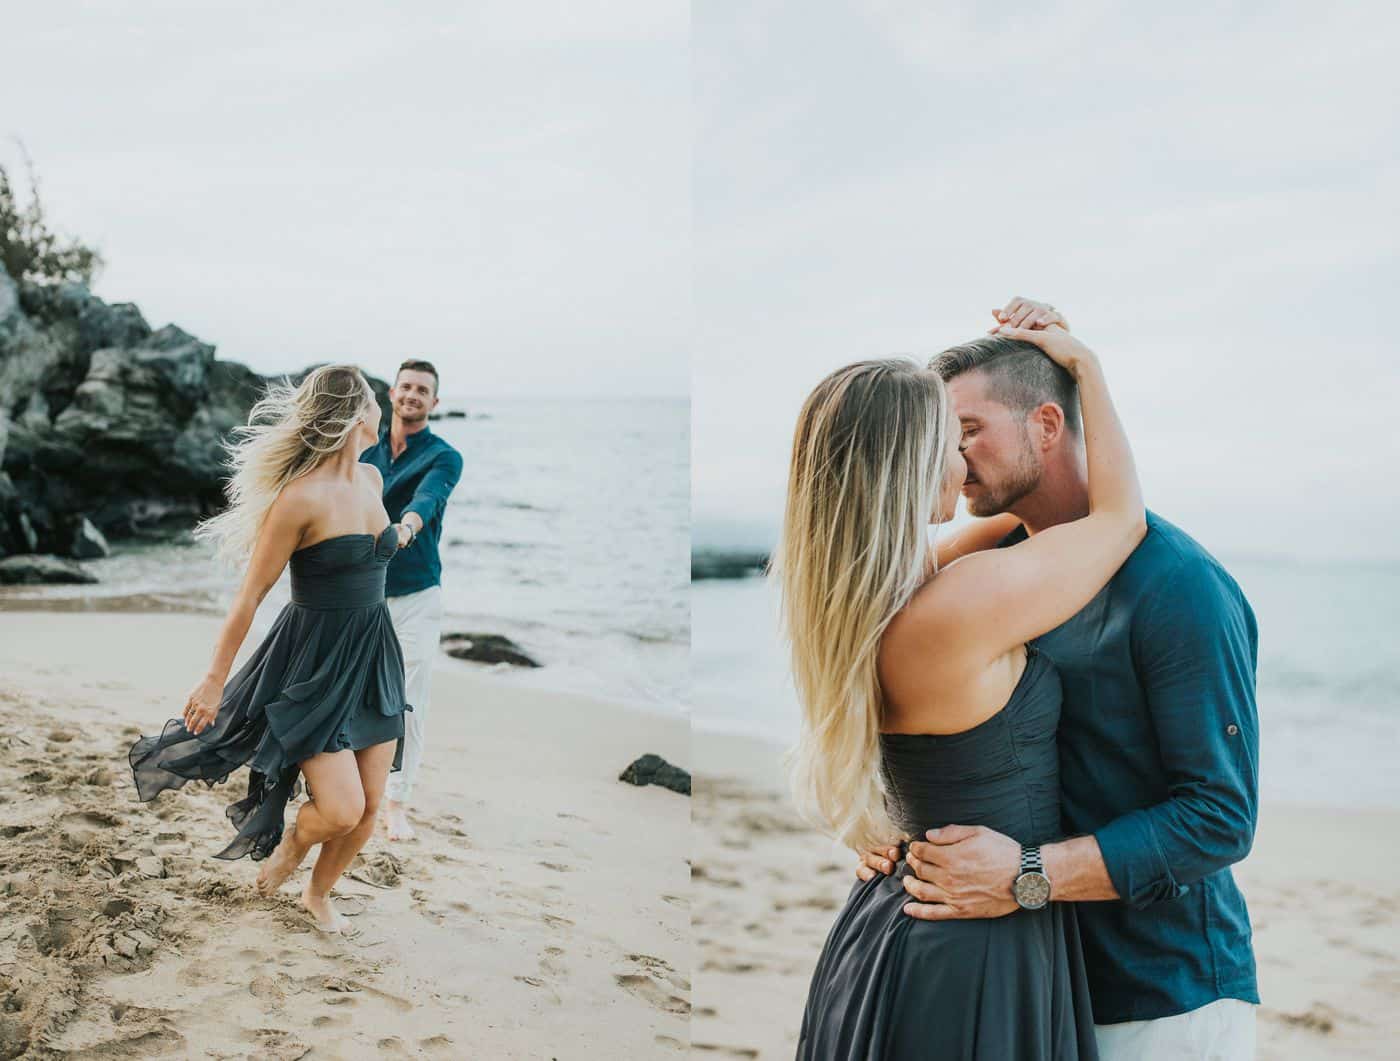 Proposal Photo Tips With A Professional Photographer